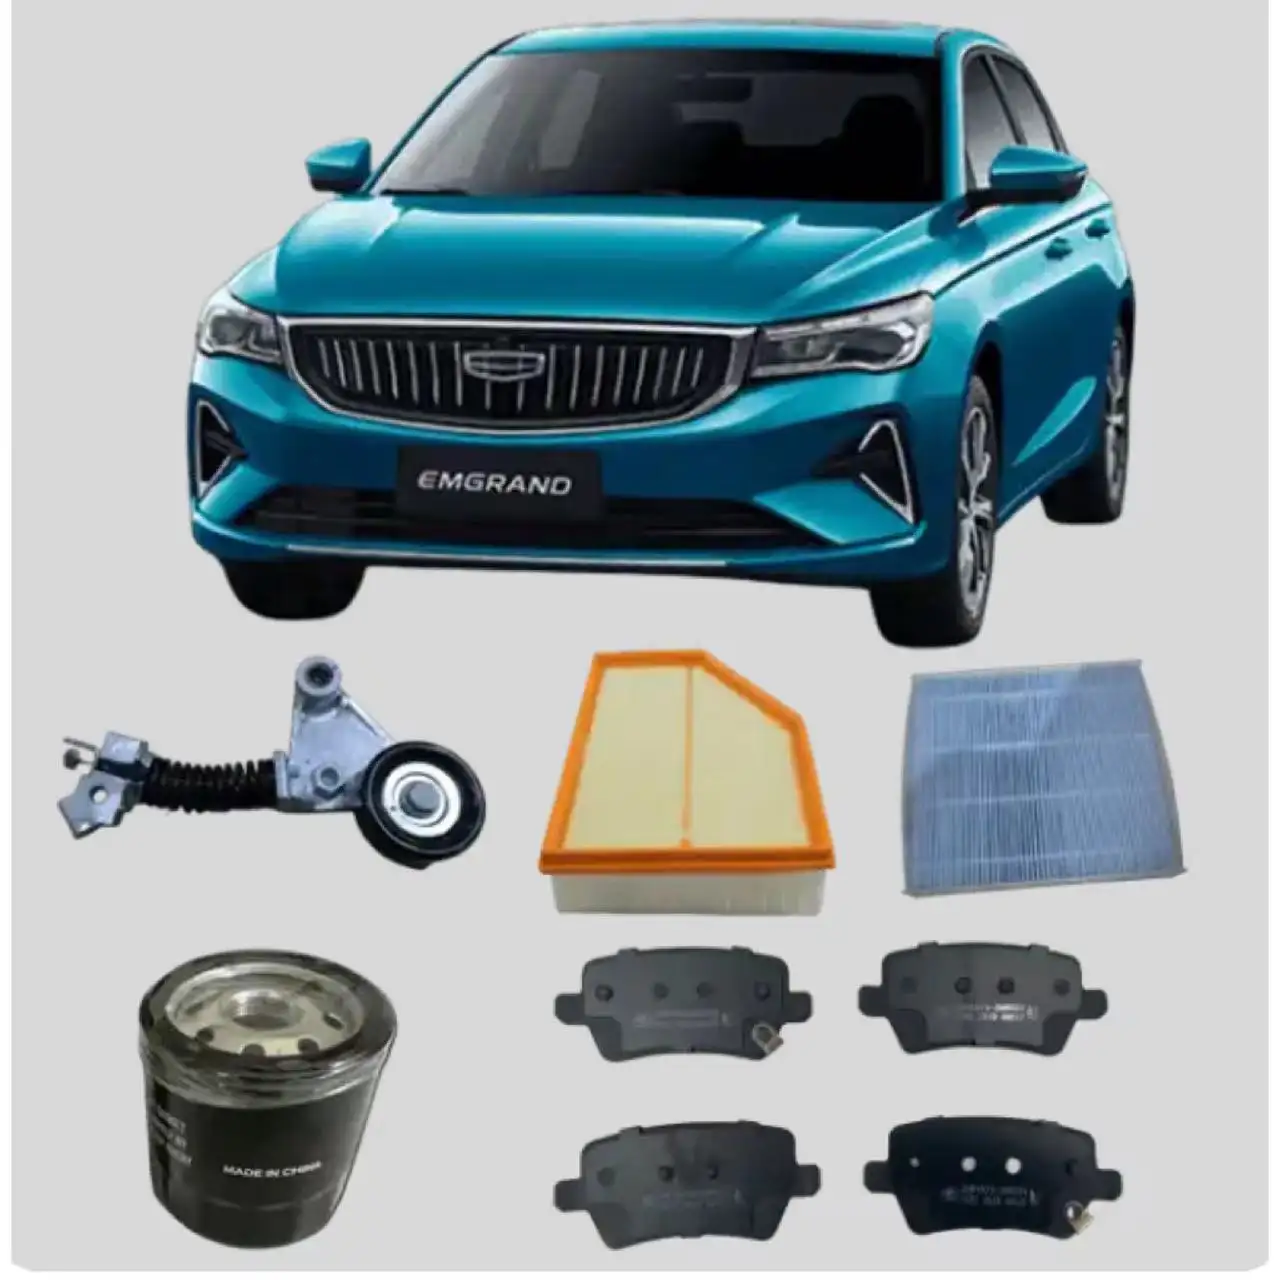 All Chinese Car Auto Parts Geely Emgrand Original,OEM,aftermarket quality Wholesale all Geely brand auto parts